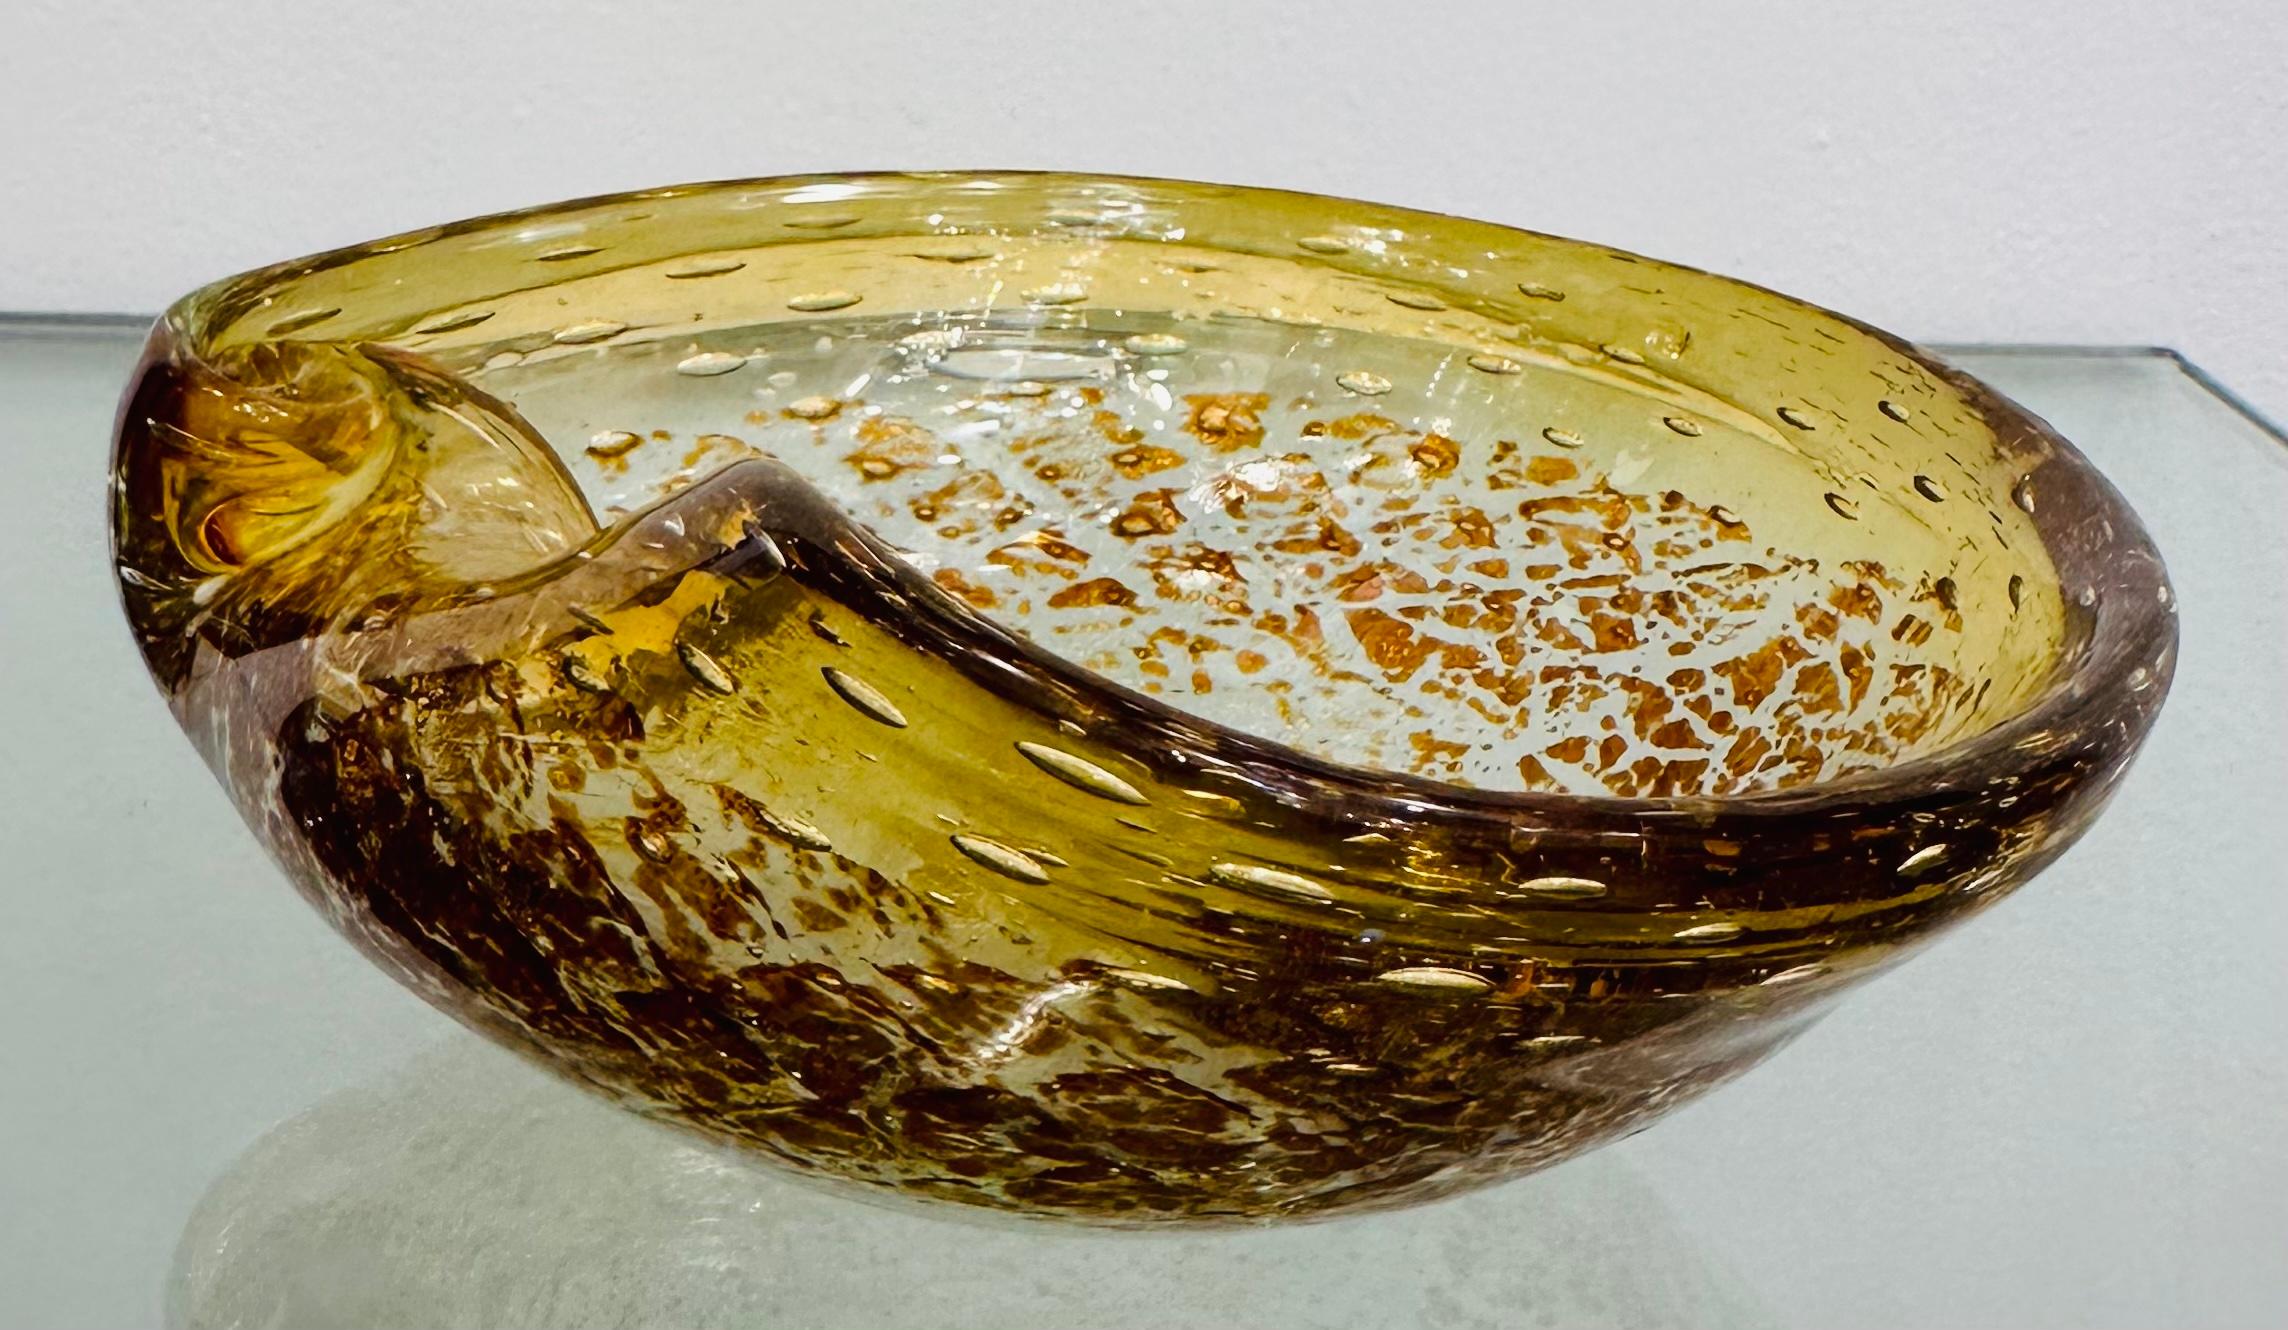 Mid-Century Modern 1960s Italian Murano Golden Inclusion Clear Glass Bowl, Candy Dish or Ashtray For Sale